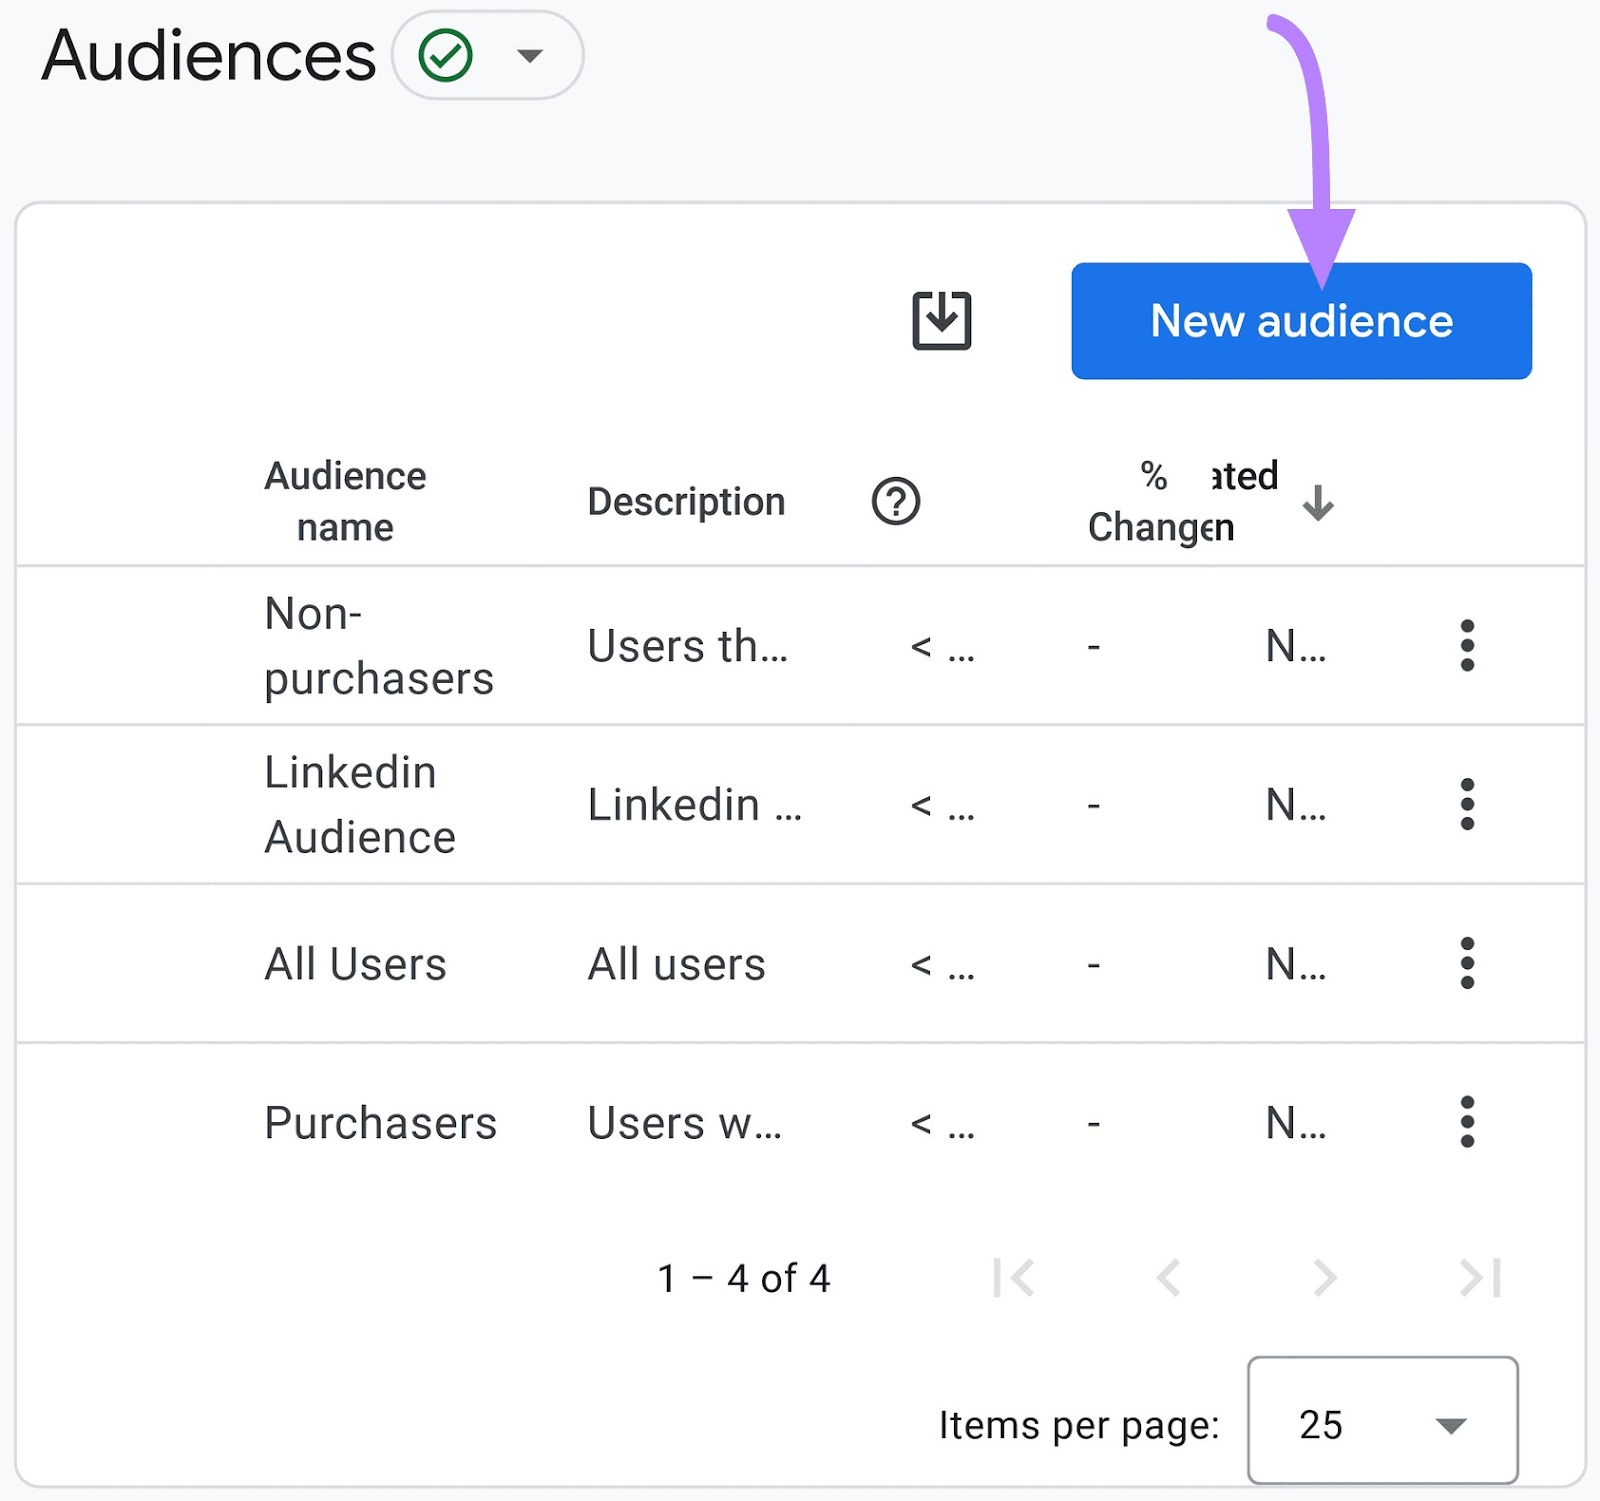 “New audience” button selected in the top right corner